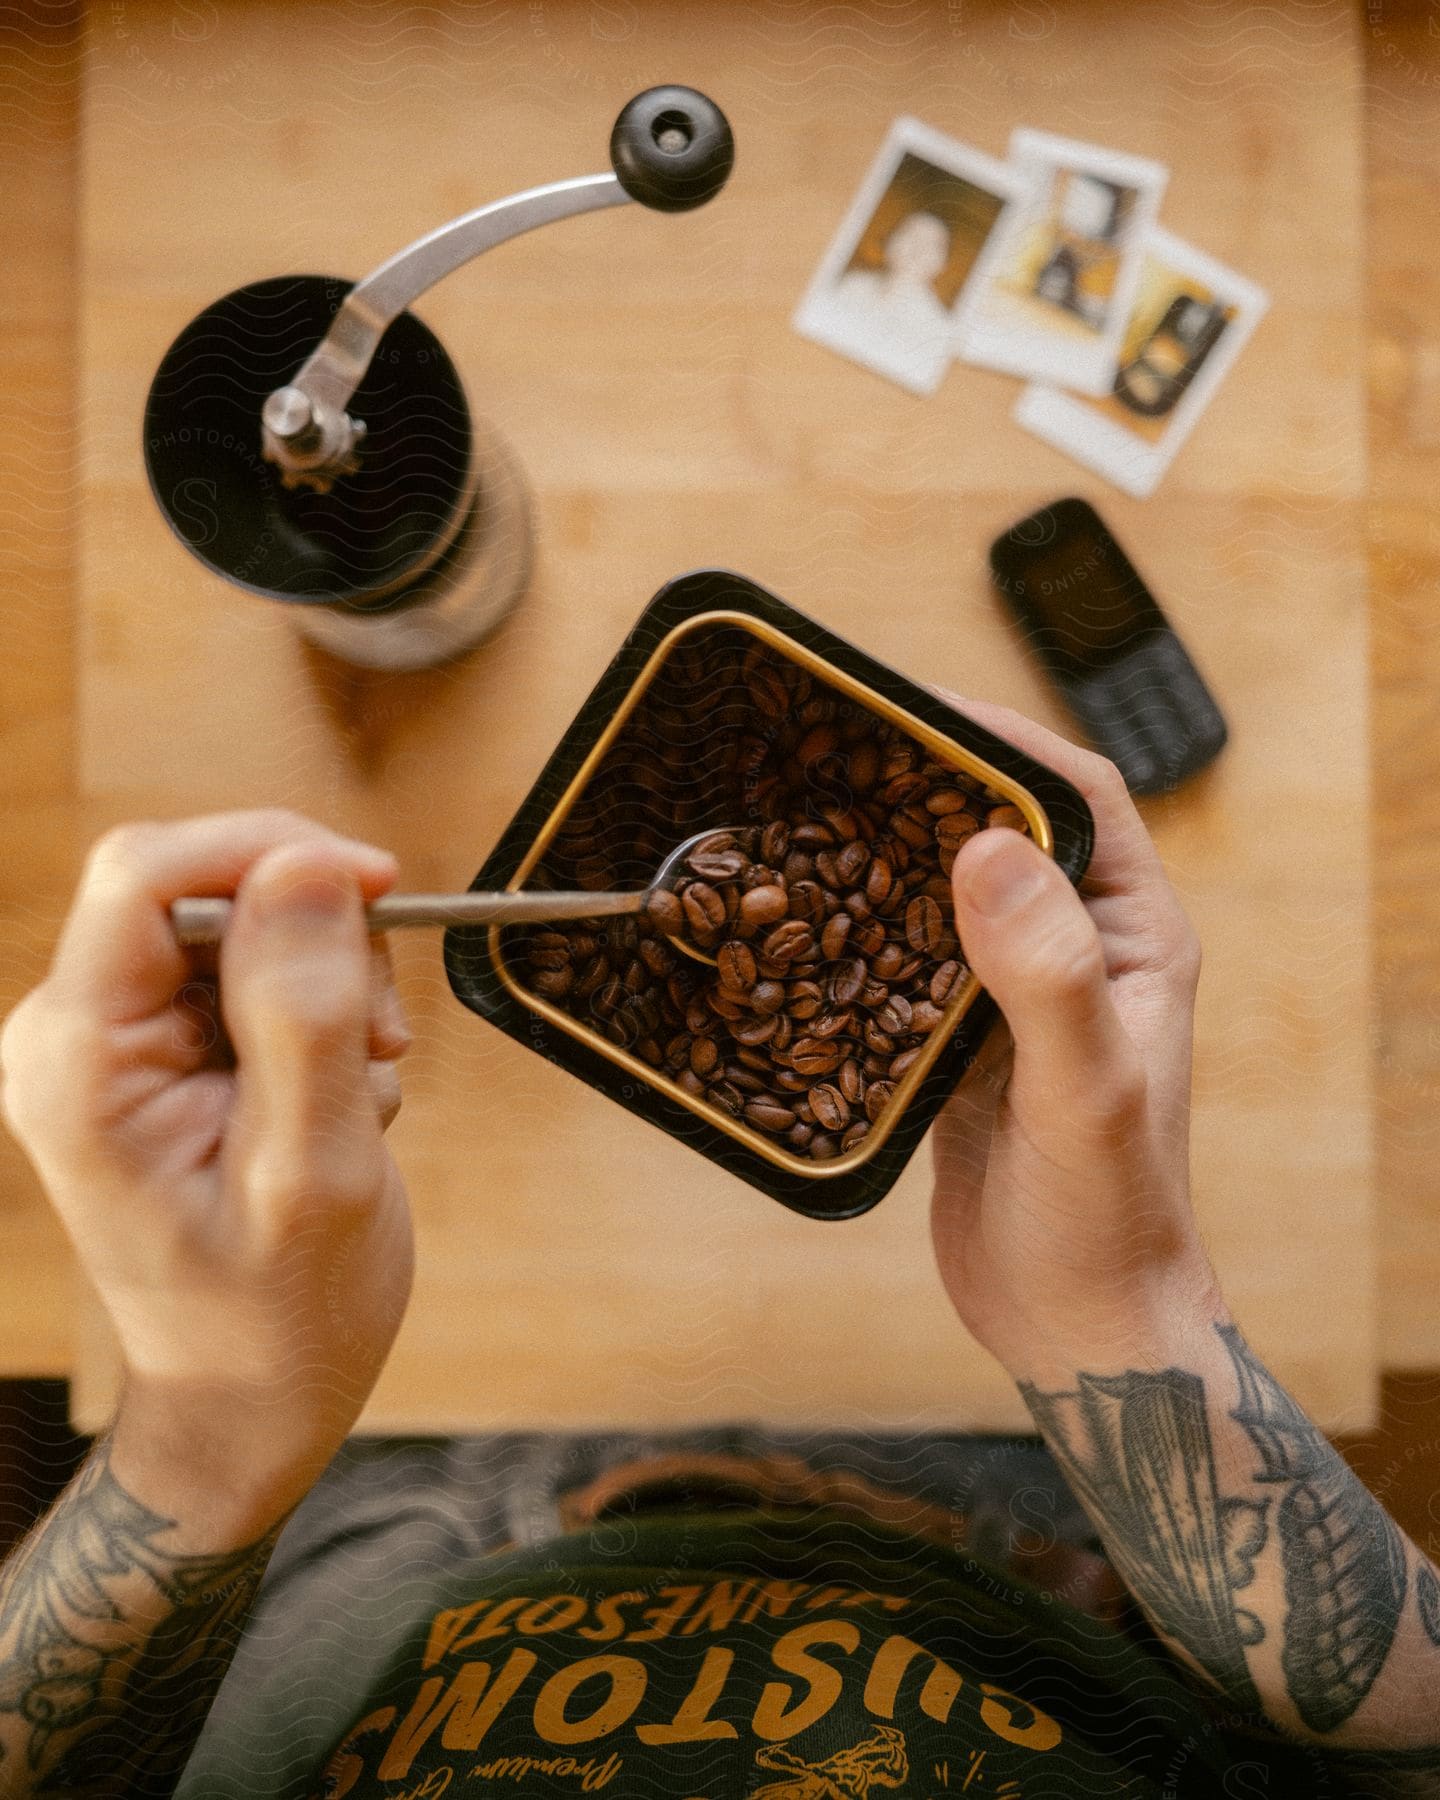 A person with tattooed hands is seen holding a plate of raw coffee beans and serving them into a hand grinder using a spoon. The grinder is placed on a table, with a mobile device also resting on the table.